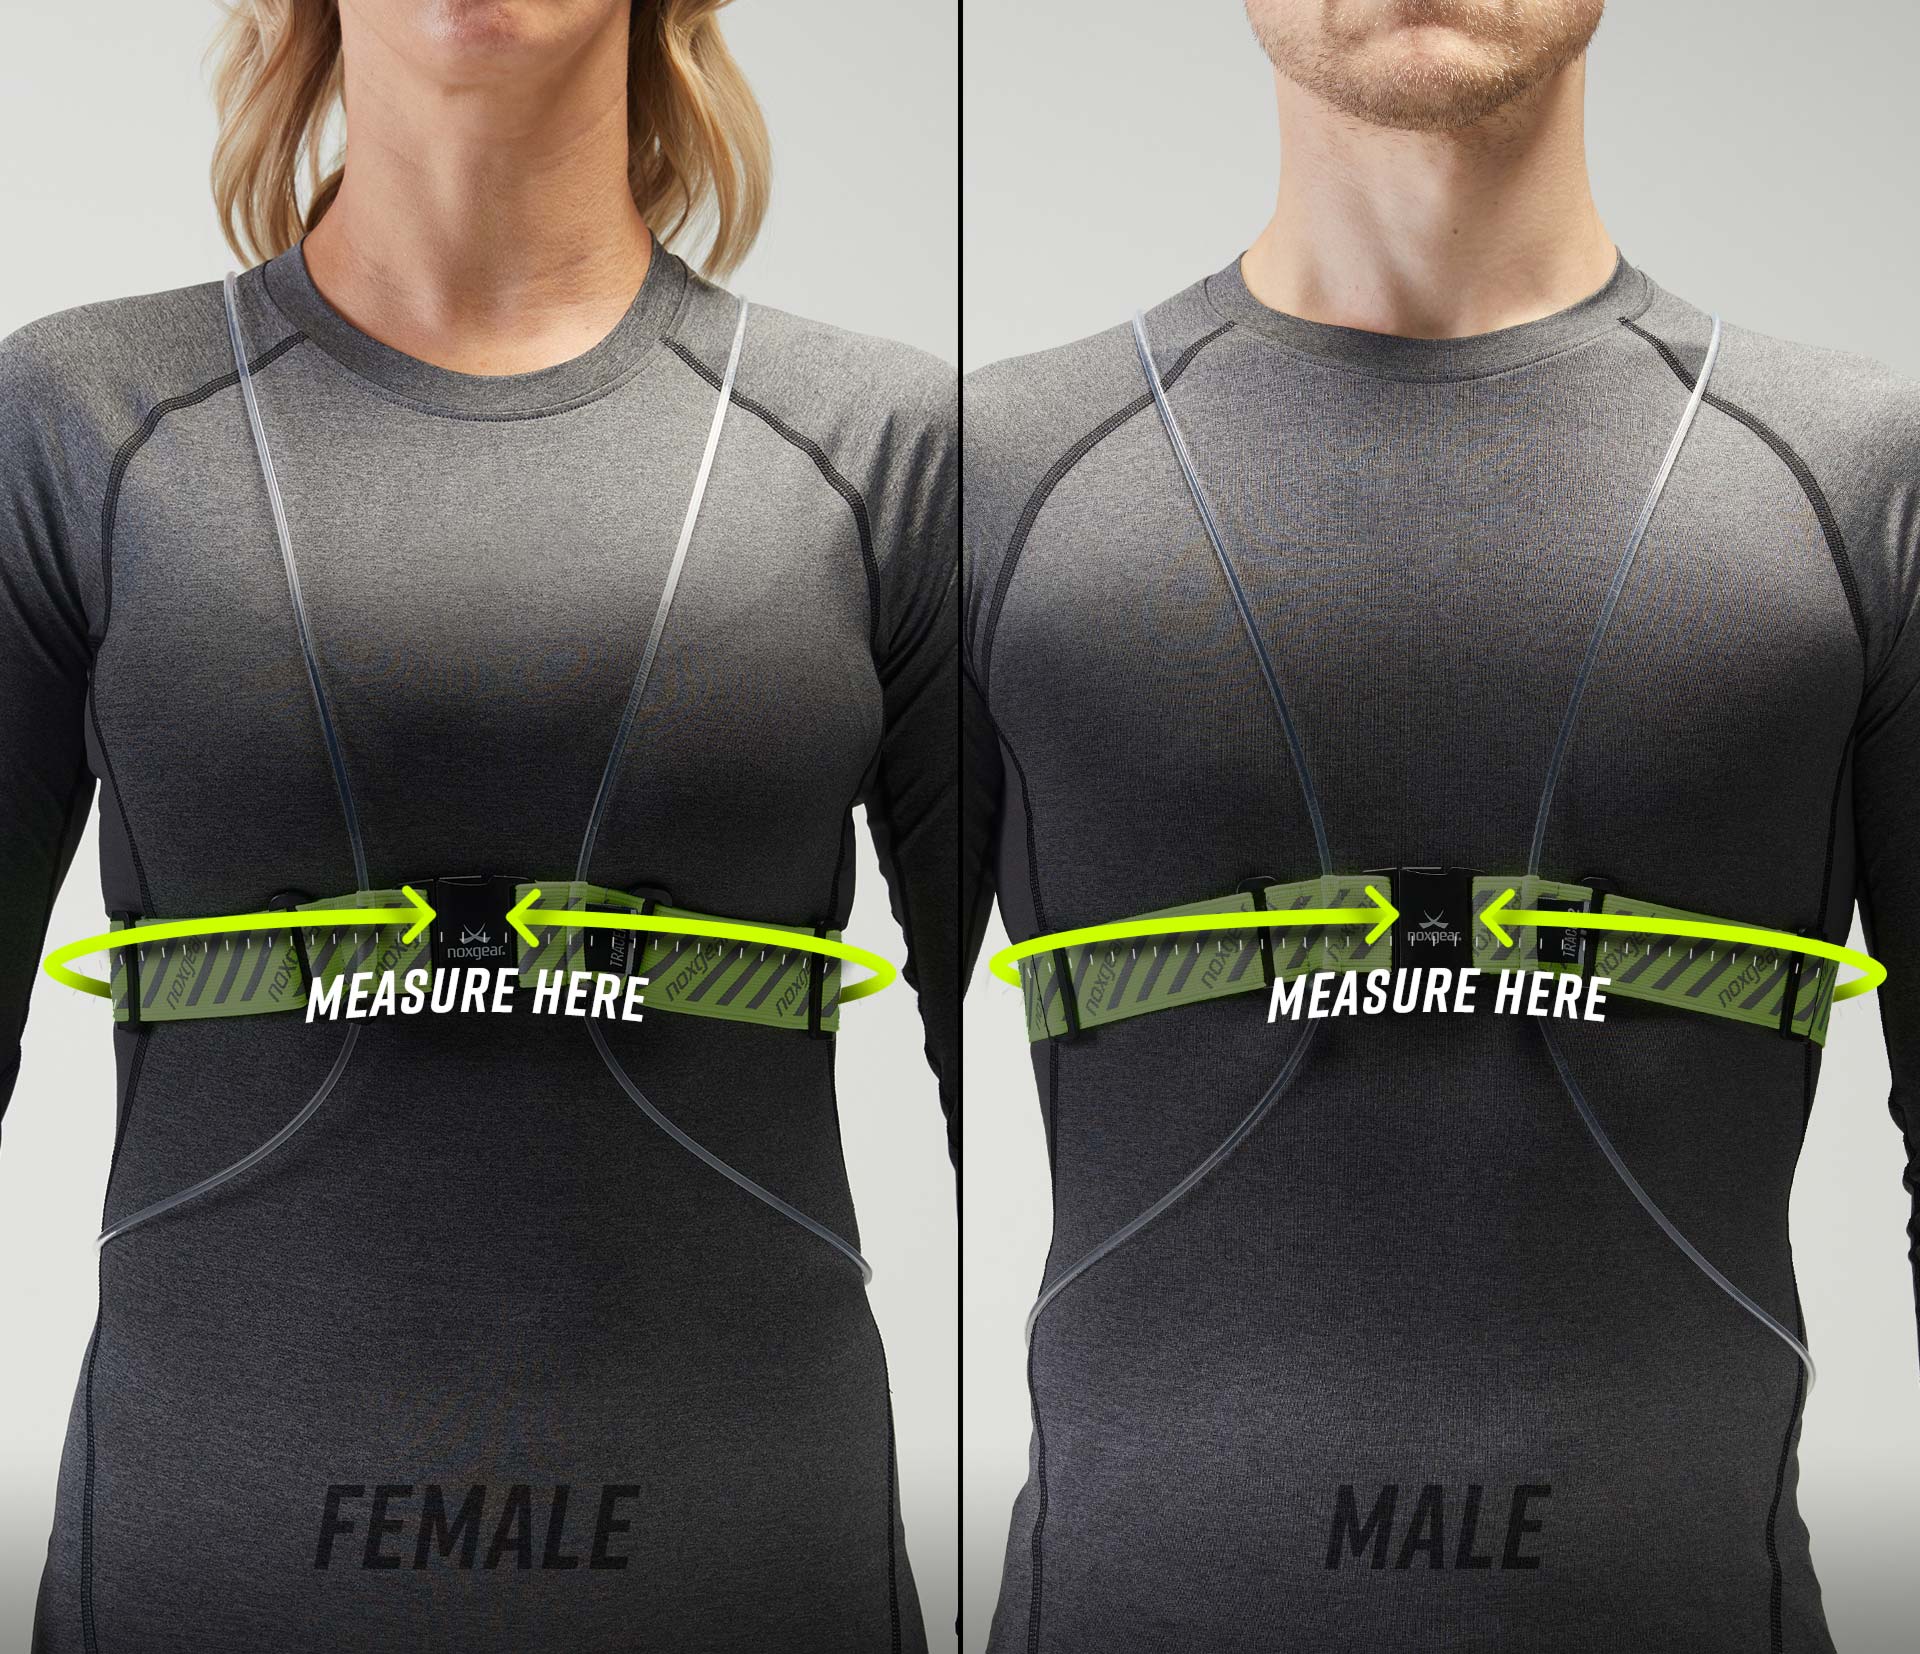 Photo showing the fit of a Tracer2 on the torso of a man and a woman.